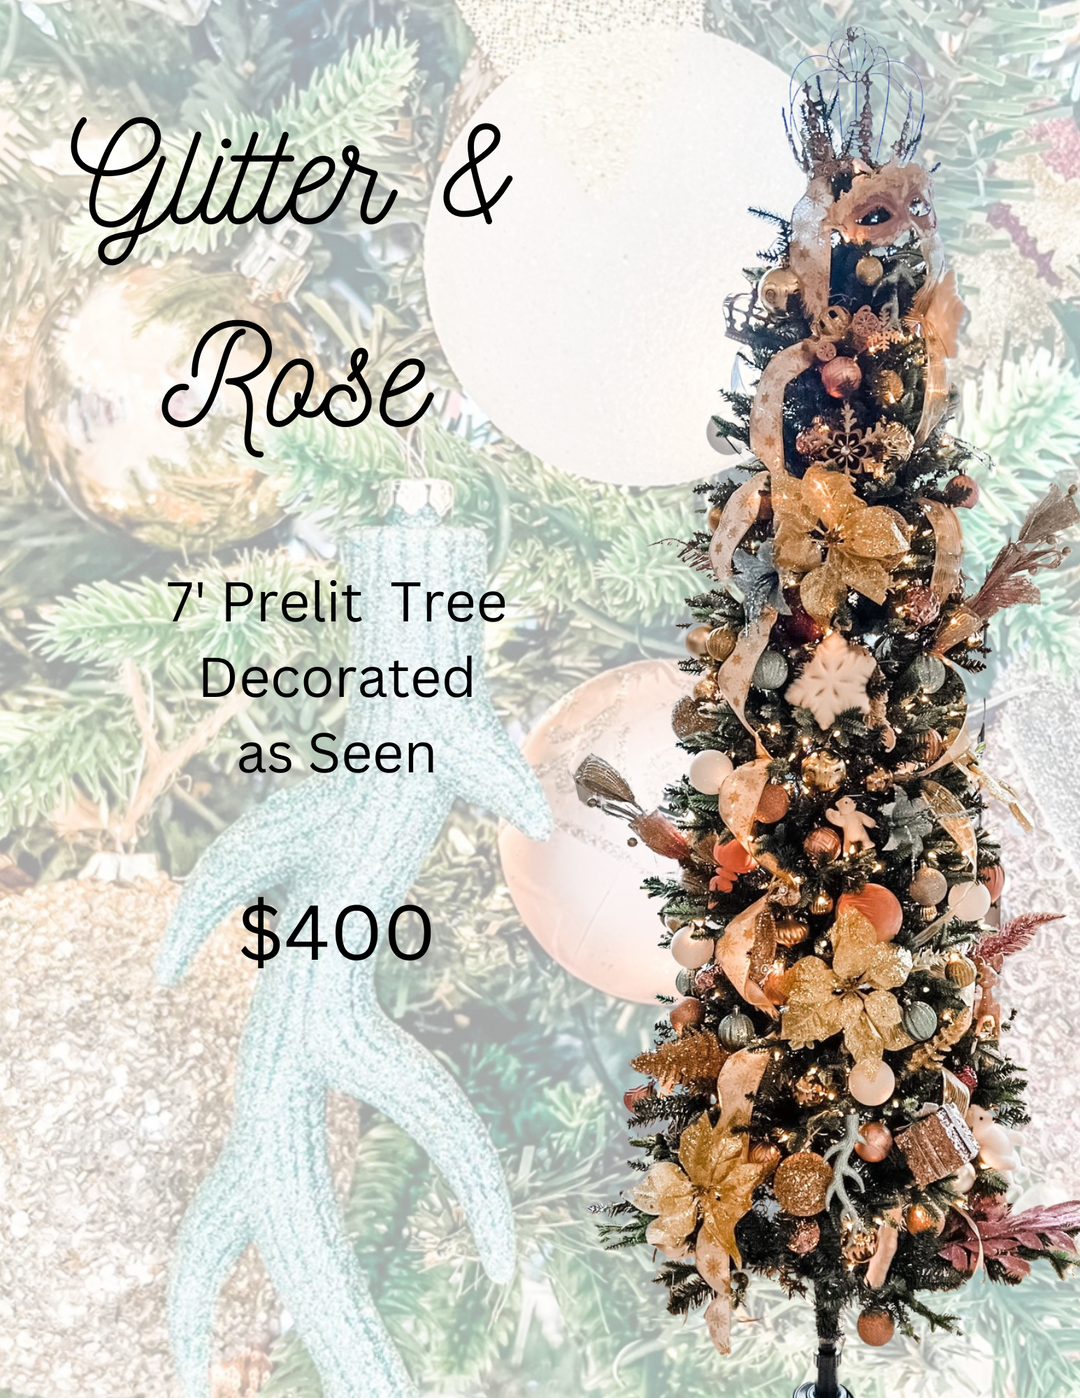 Glitter & Rose Decorated Tree - The Teal Antler Boutique